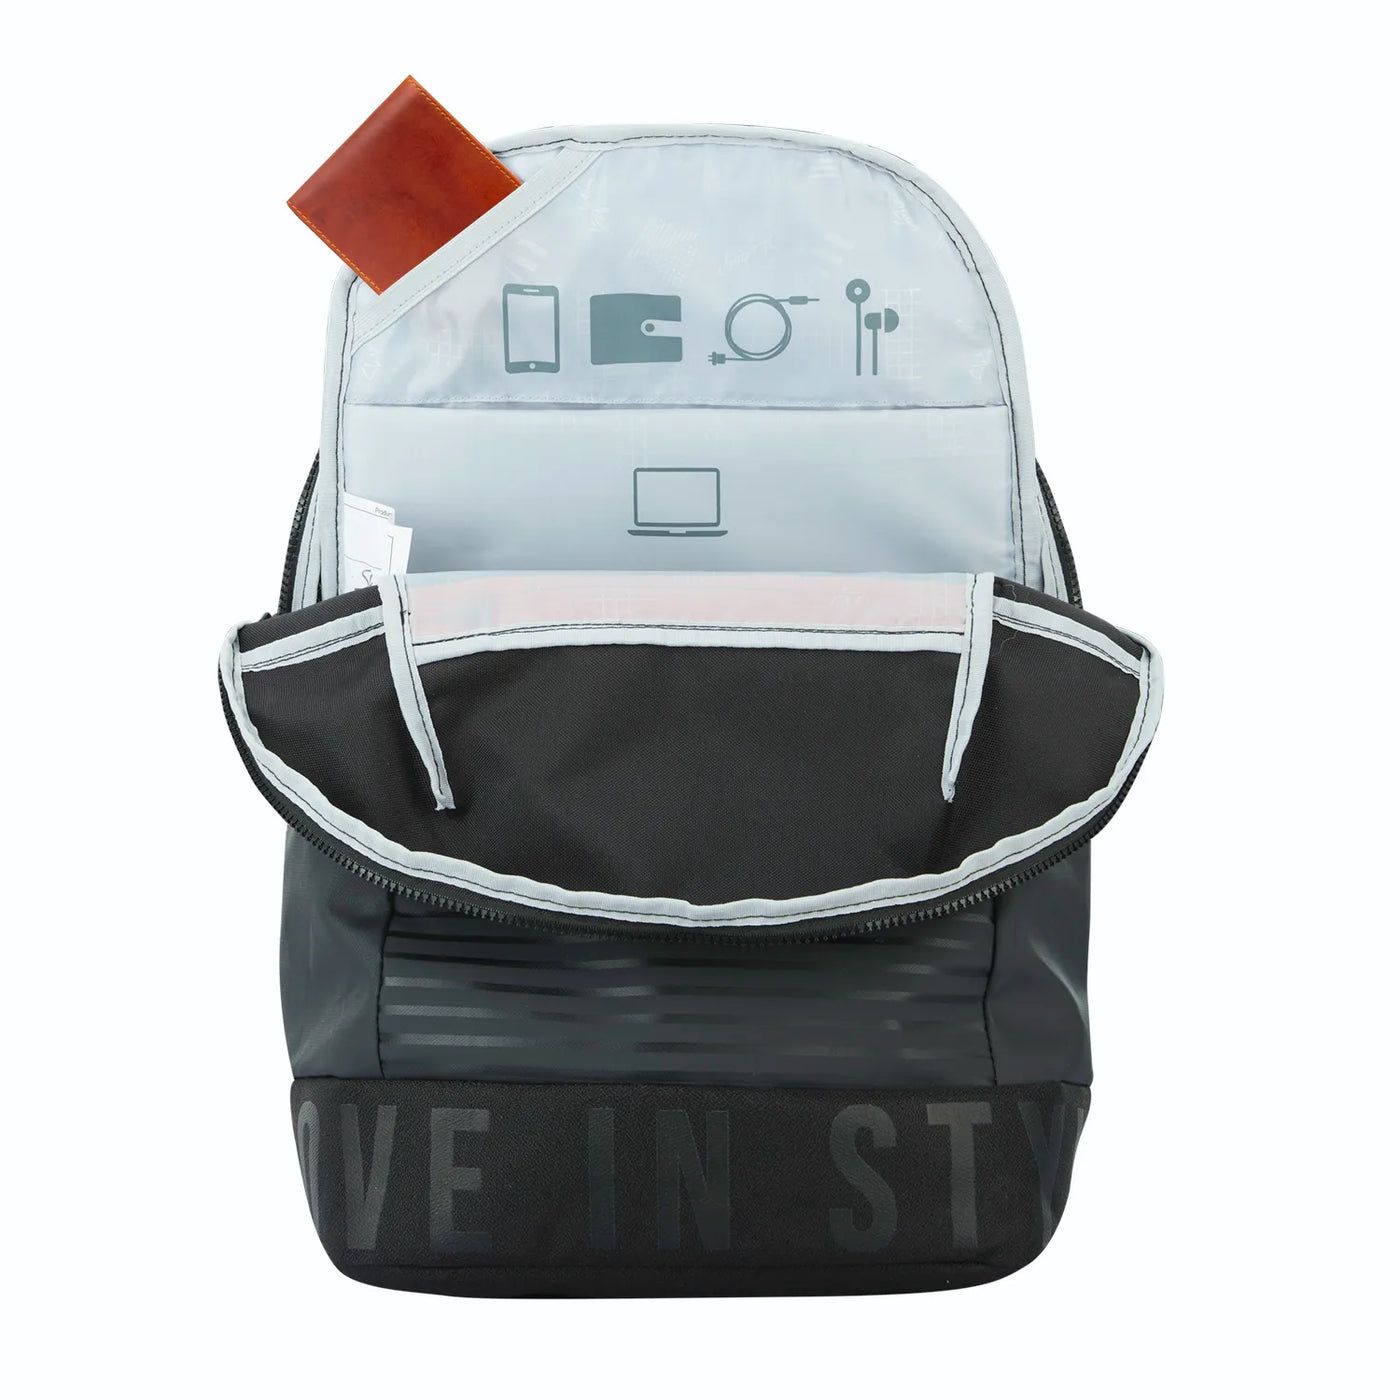 SKYBAGS BOHO "01 BACKPACK WITH RAIN COVER" BLACK